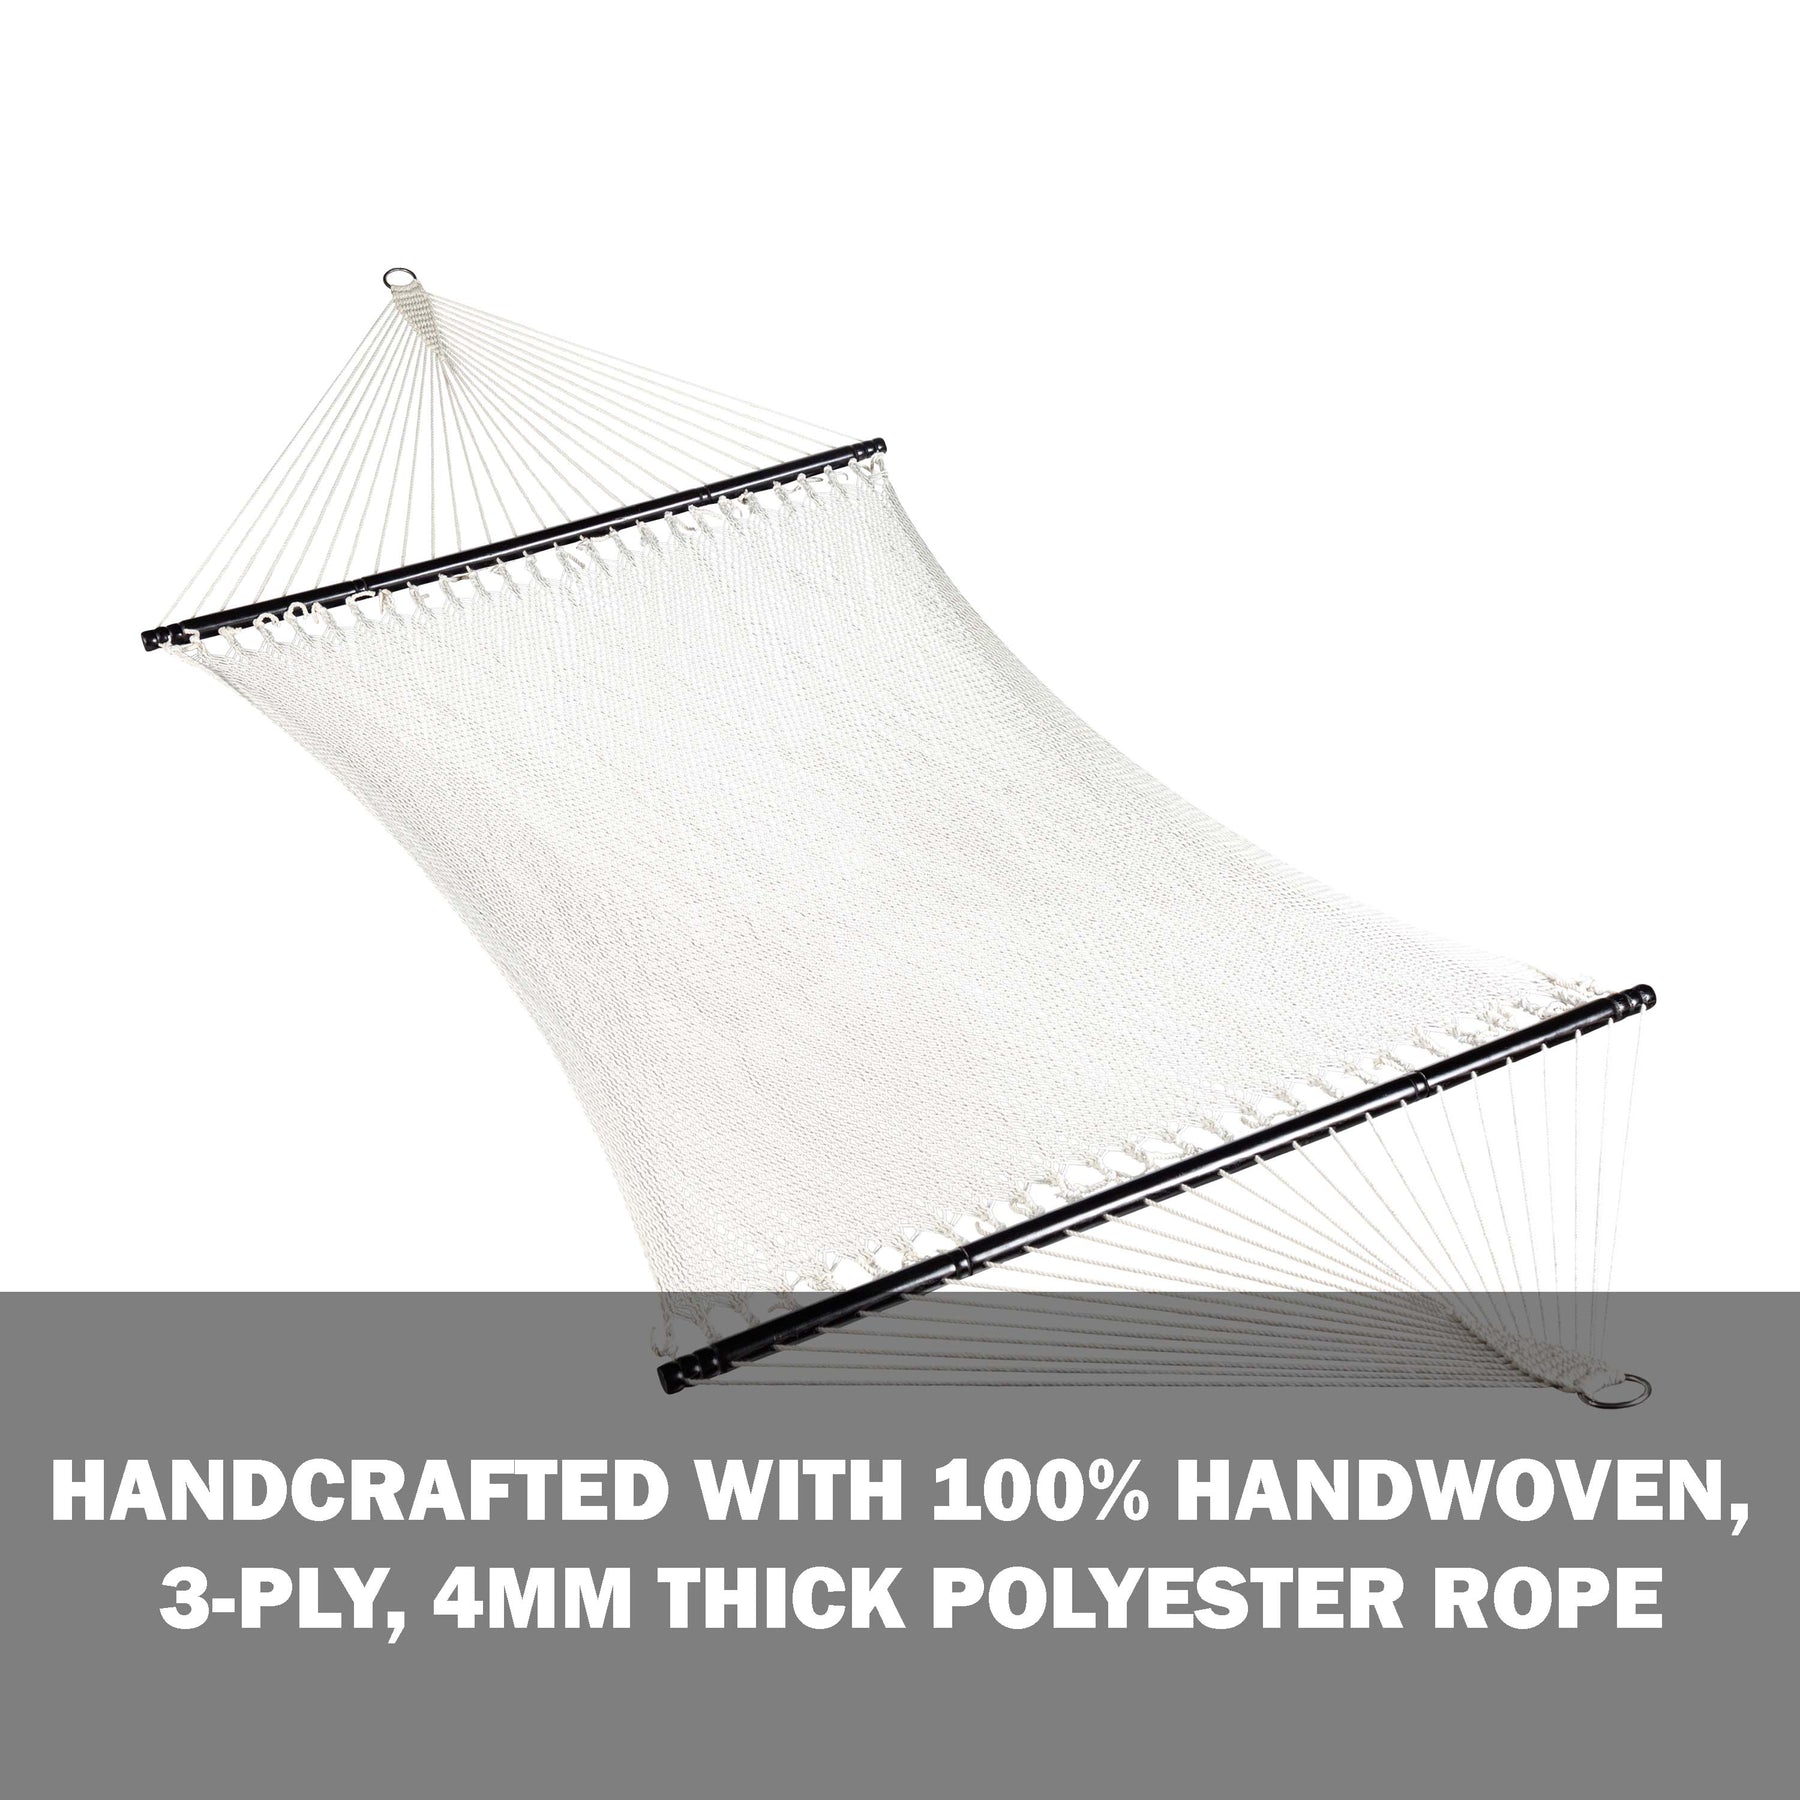 Handcrafted with 100 percent handwoven, 3-ply, 4mm thick polyester rope.